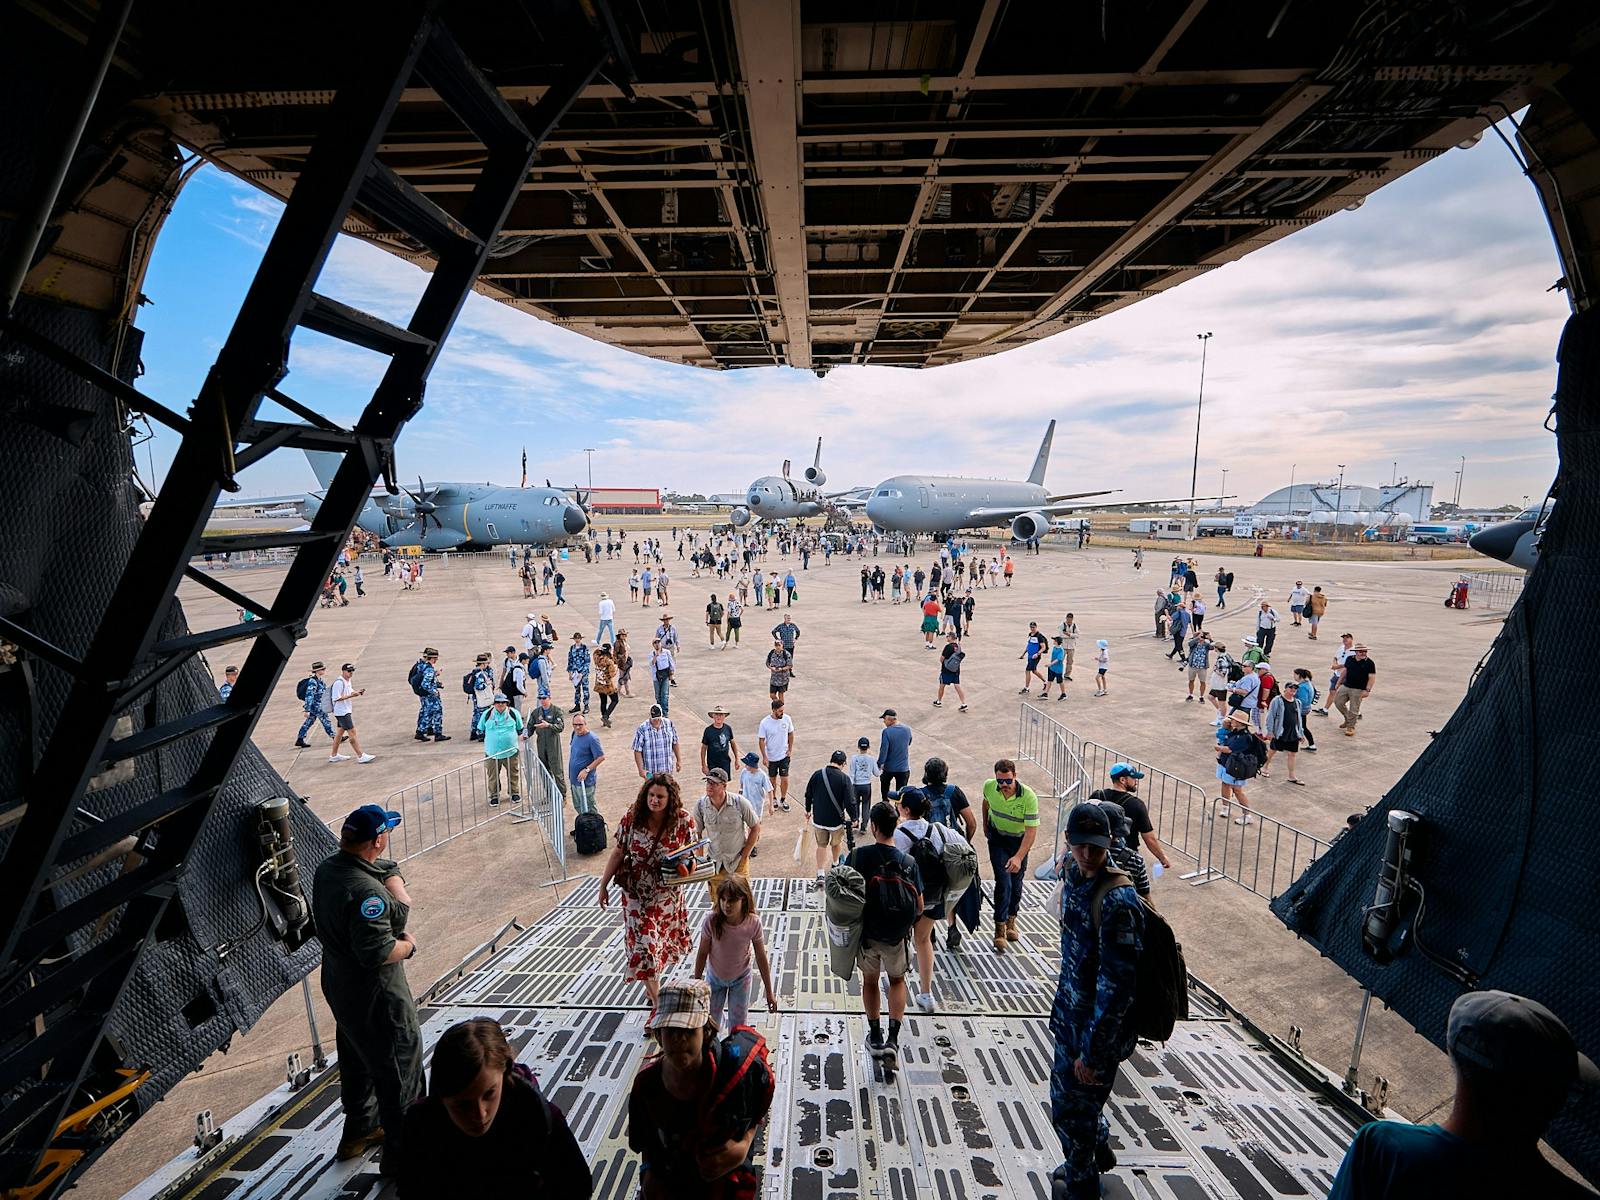 Attendees Walking Inside a Military Plane